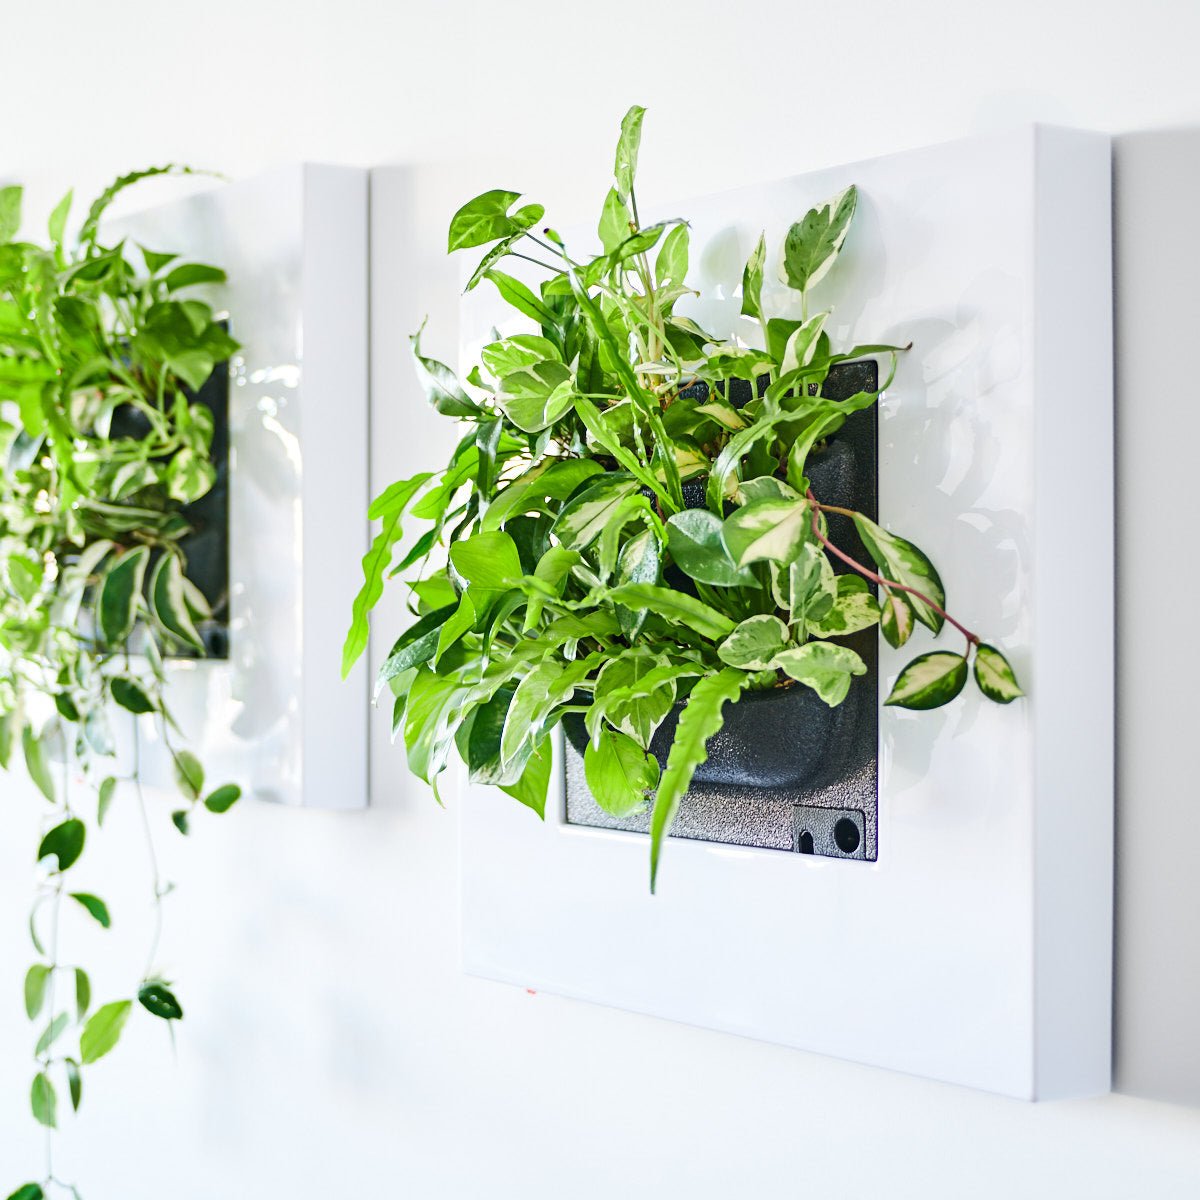 LIVE FRAME PLANTER WITHOUT PLANTS - White - My City Plants